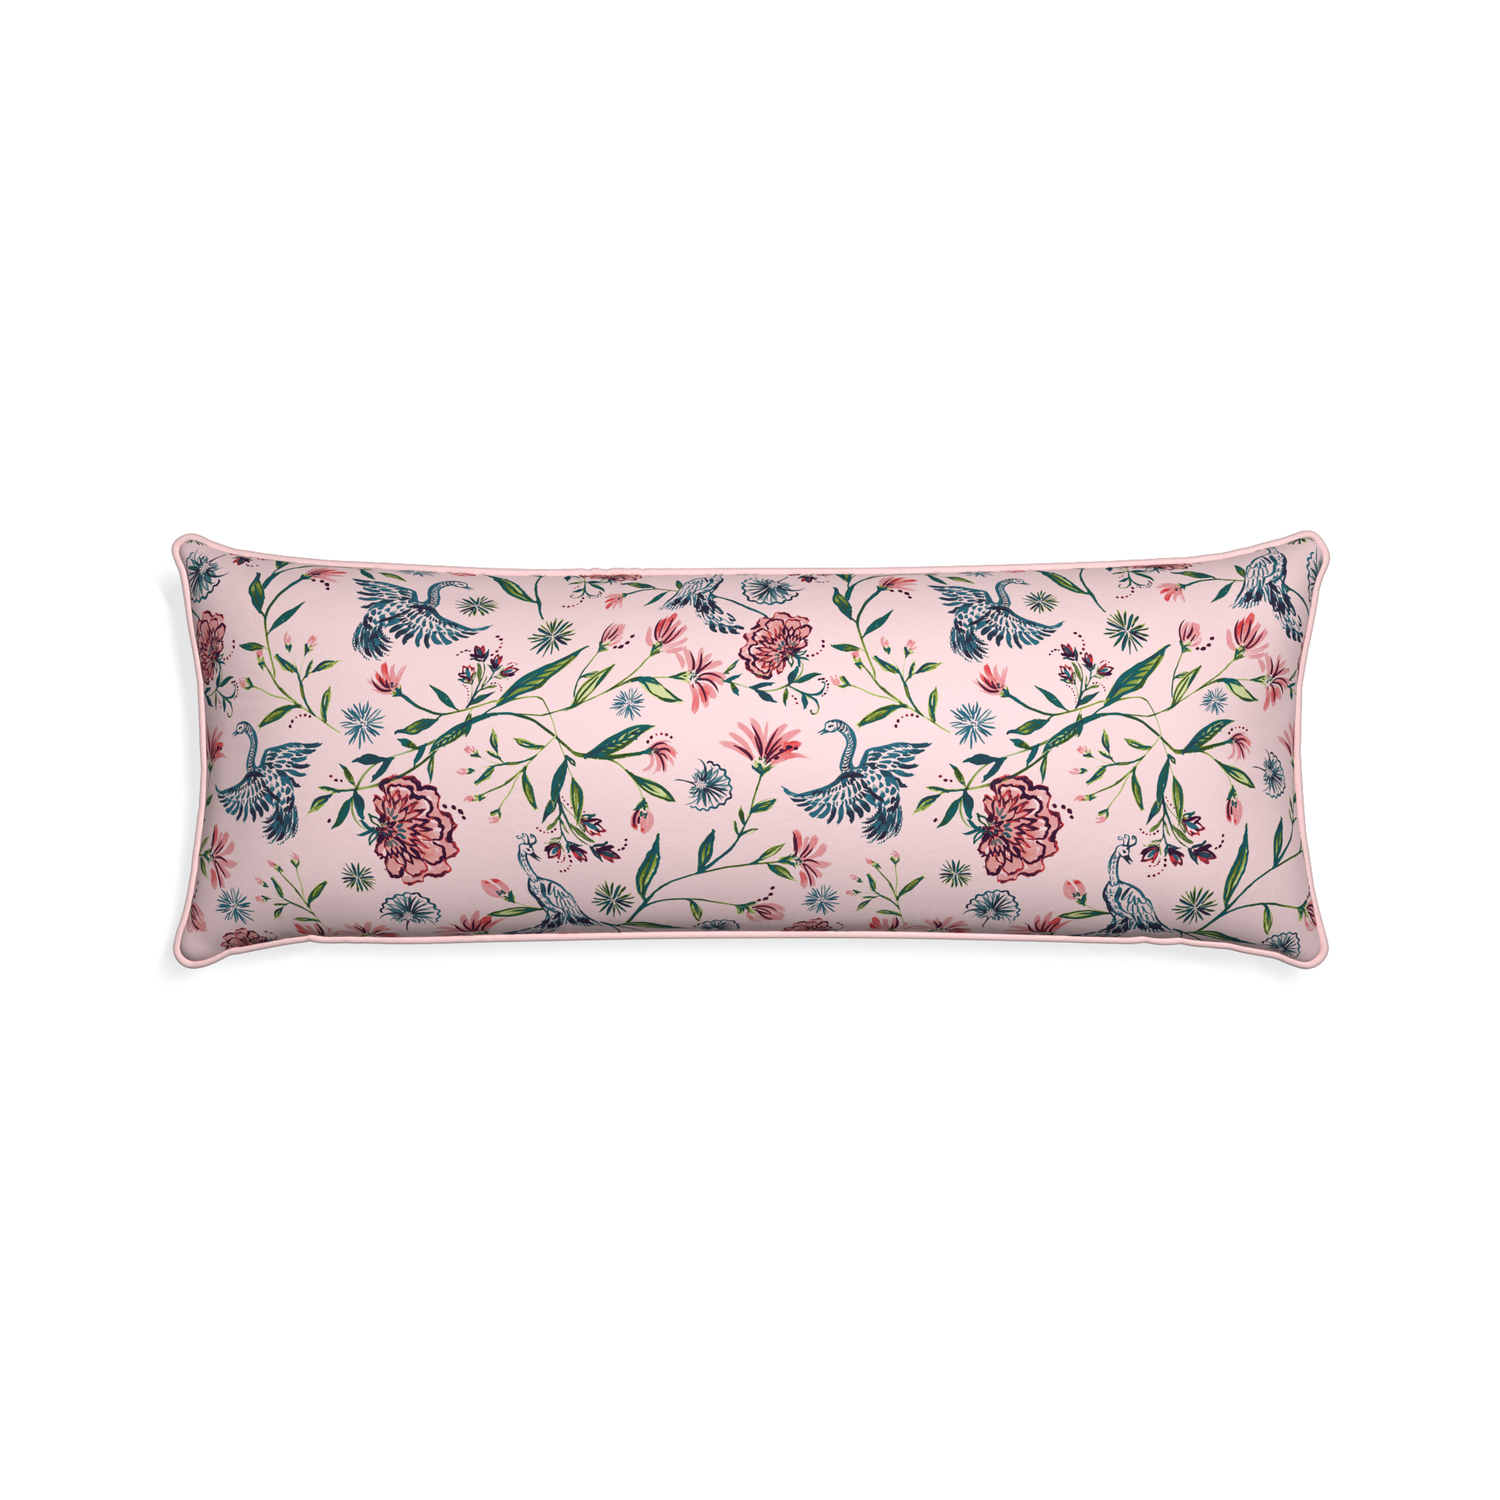 Xl-lumbar daphne rose custom pillow with petal piping on white background